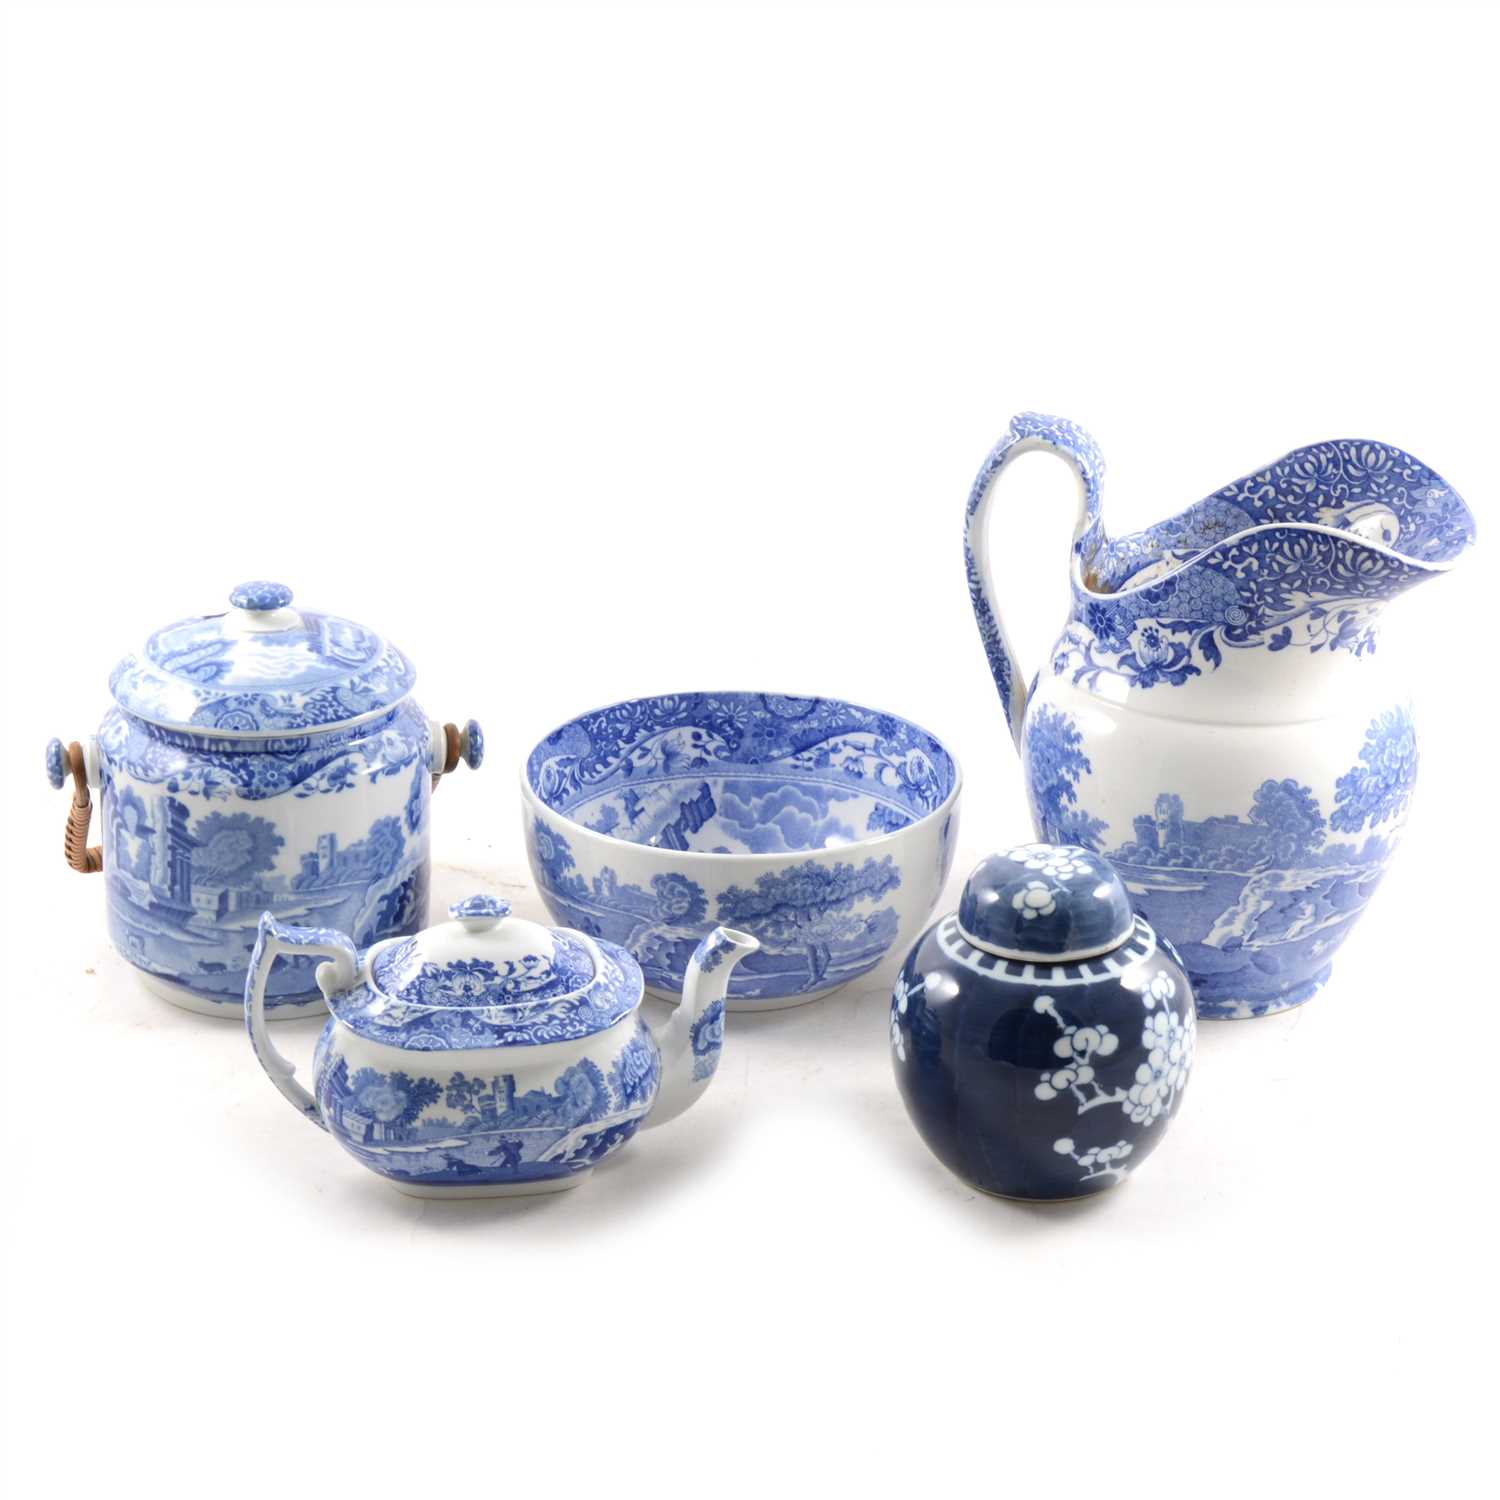 Lot 60 - Collection of Copeland Spode's Italian Transferware, and other blue and white transferware pottery.